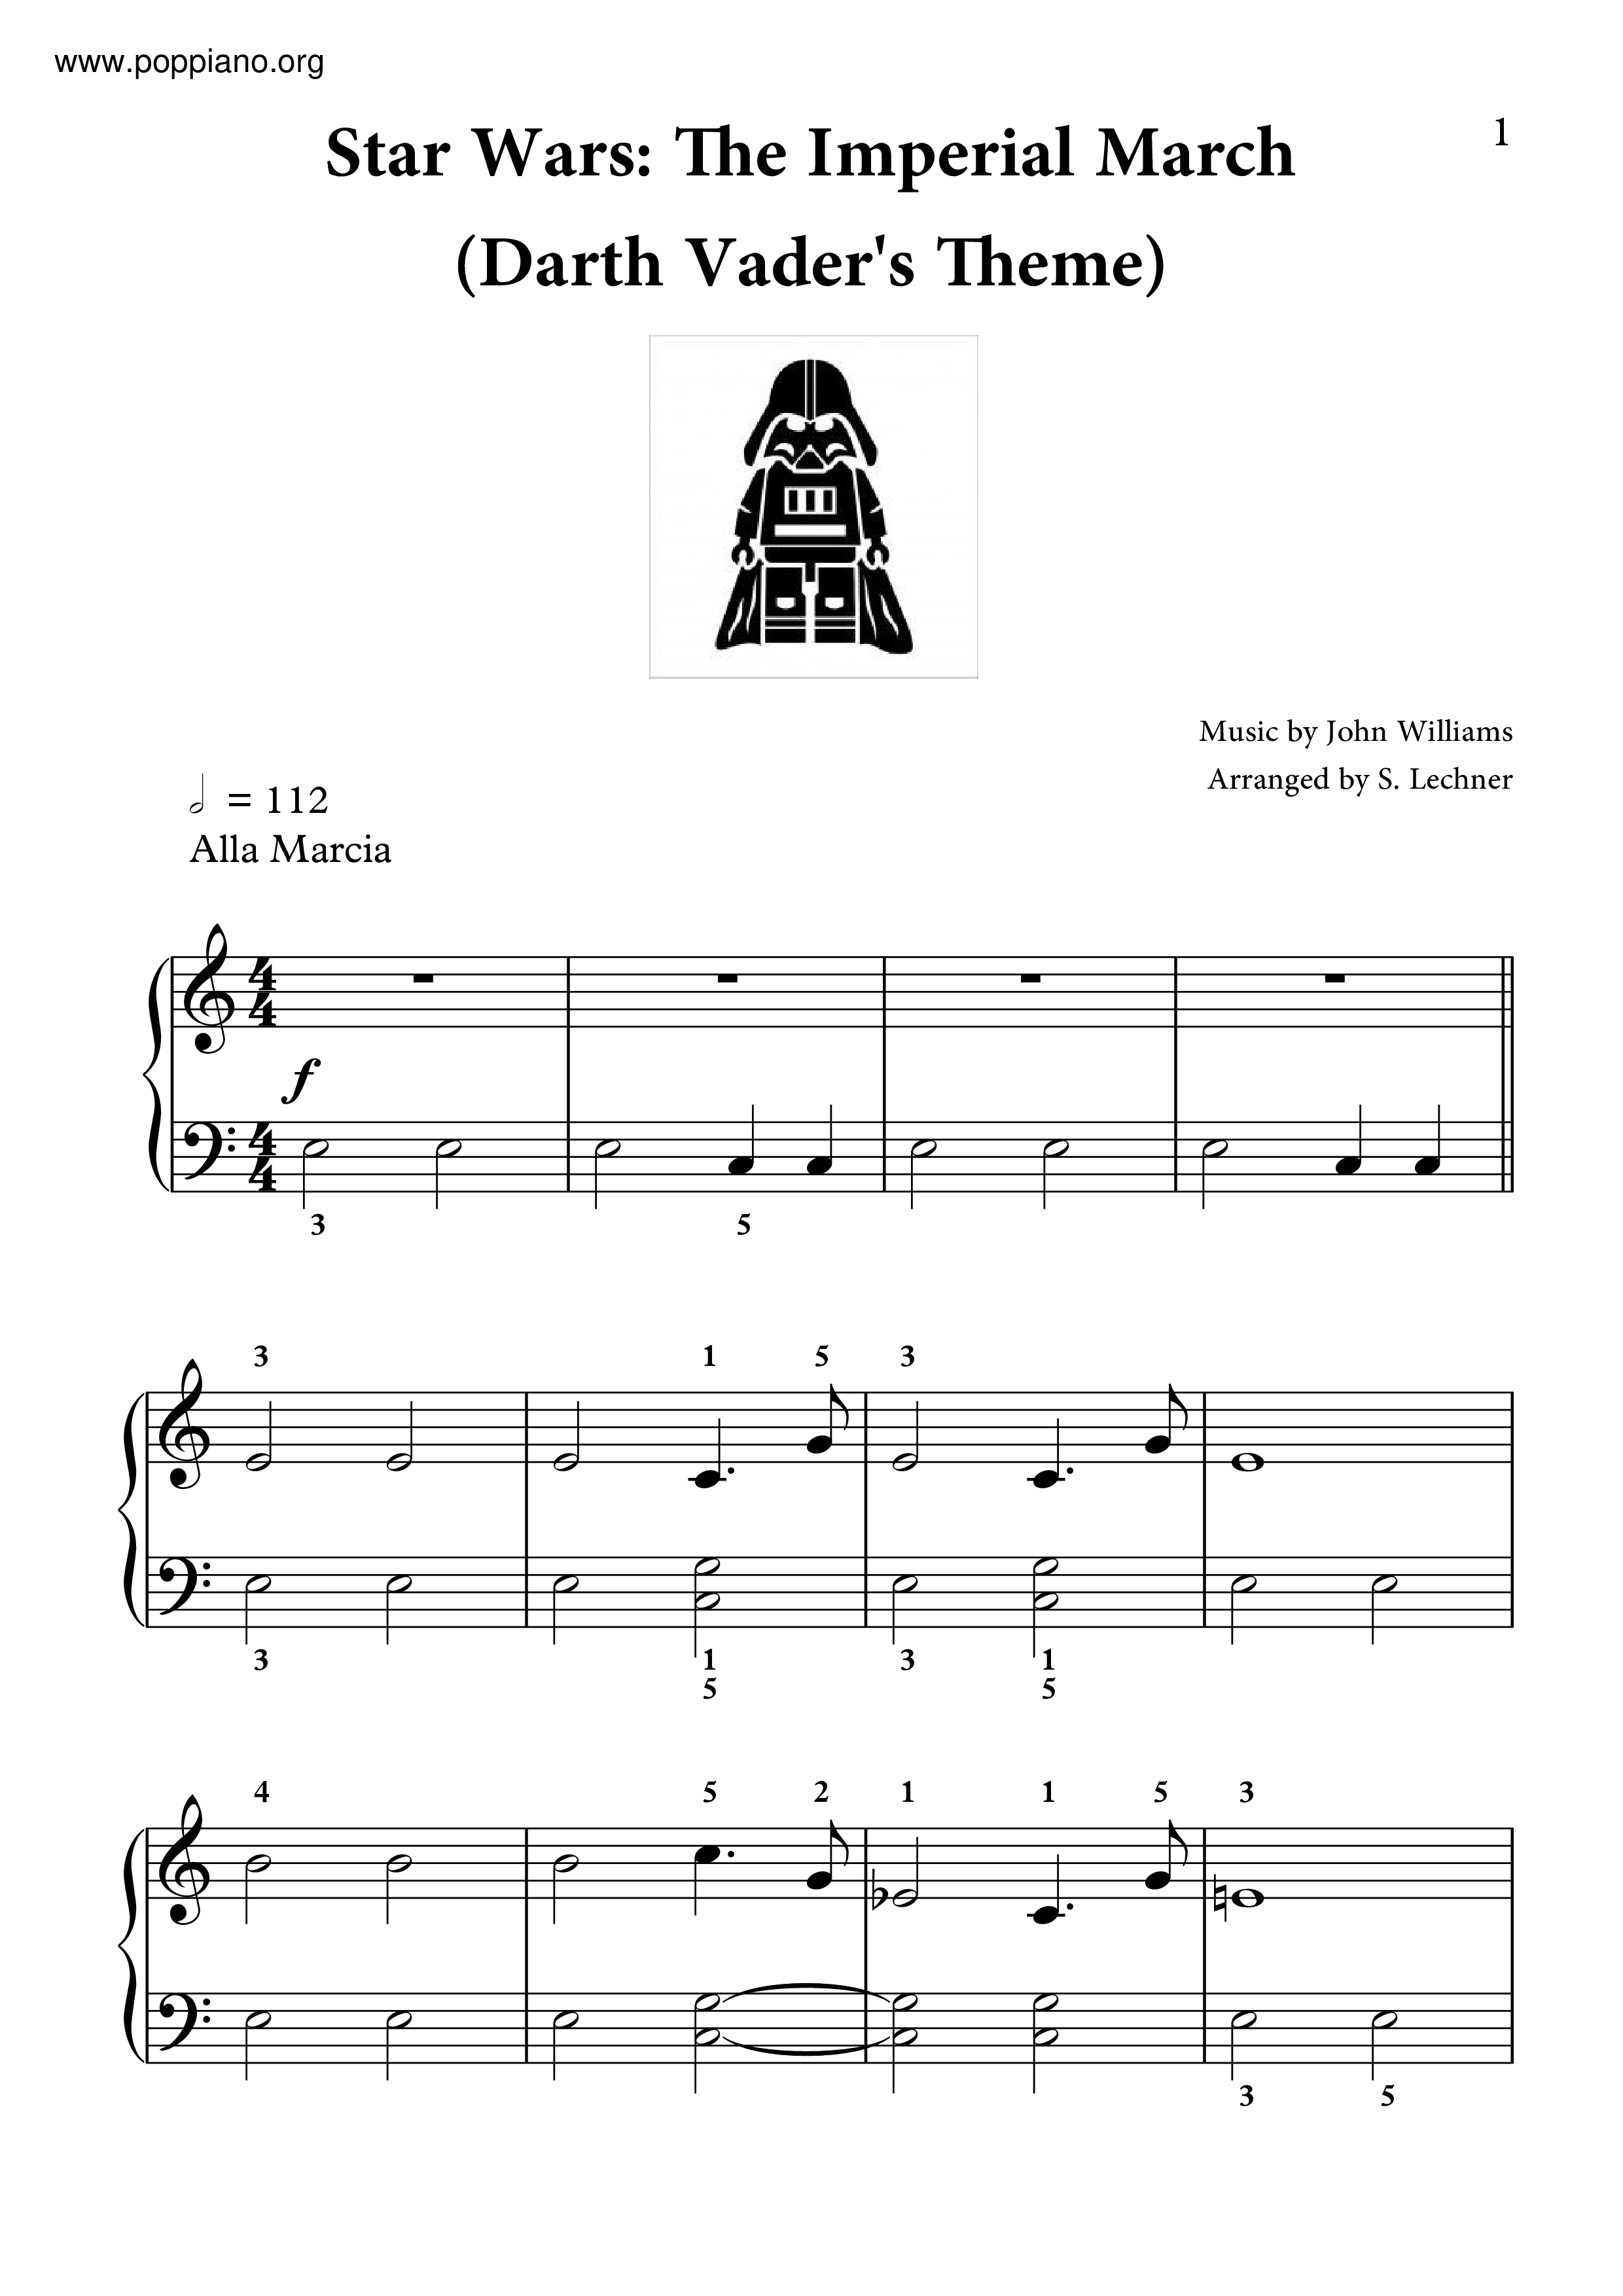 ☆ John Williams-Star Wars - The March Music - Free Score Download ☆